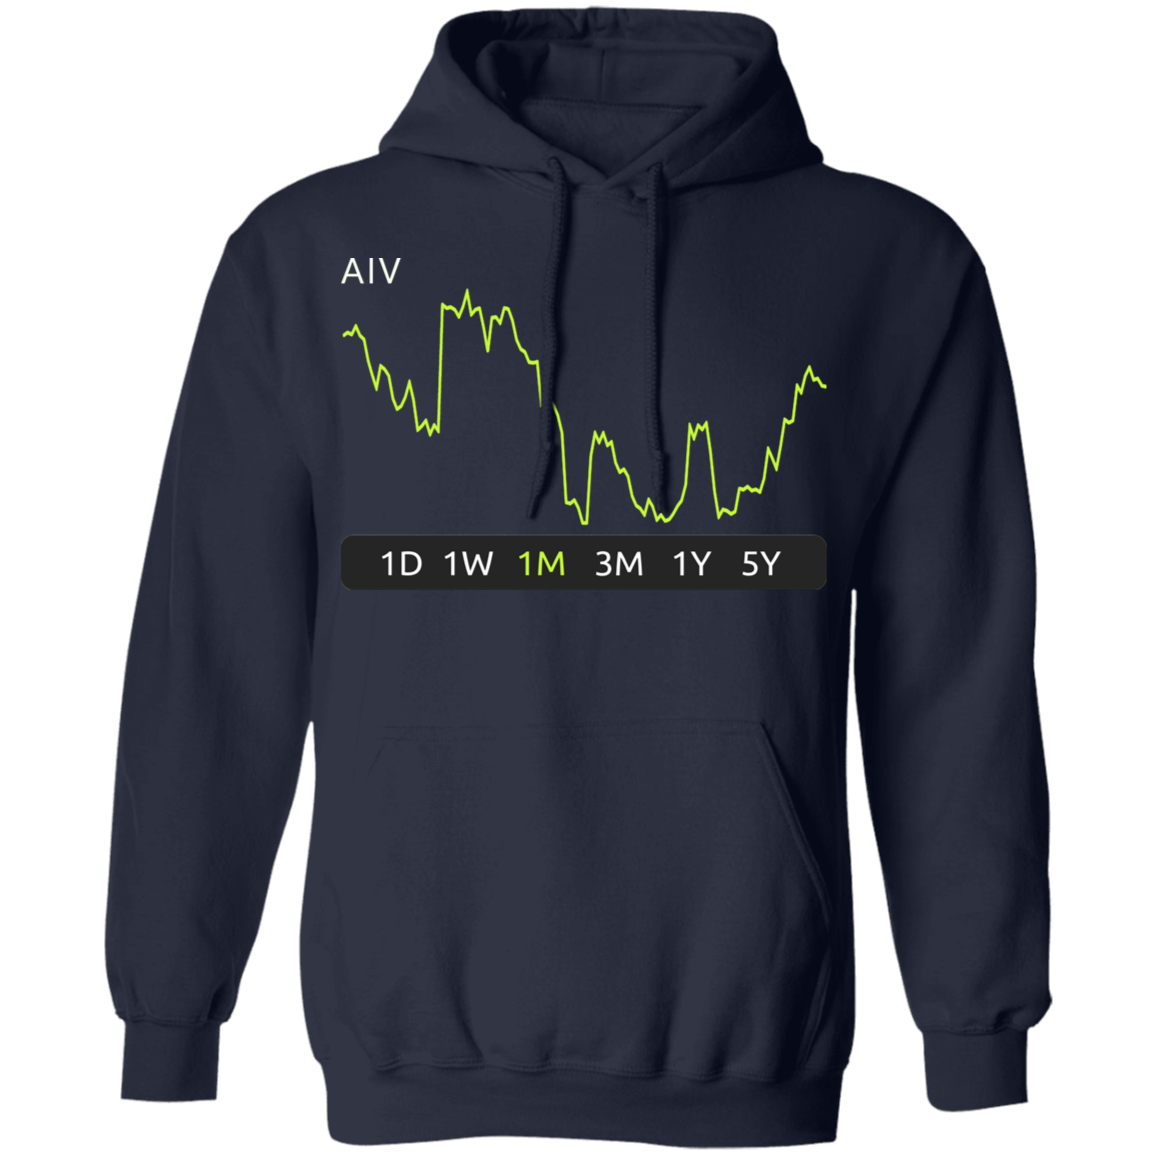 AIV Stock 1m Pullover Hoodie